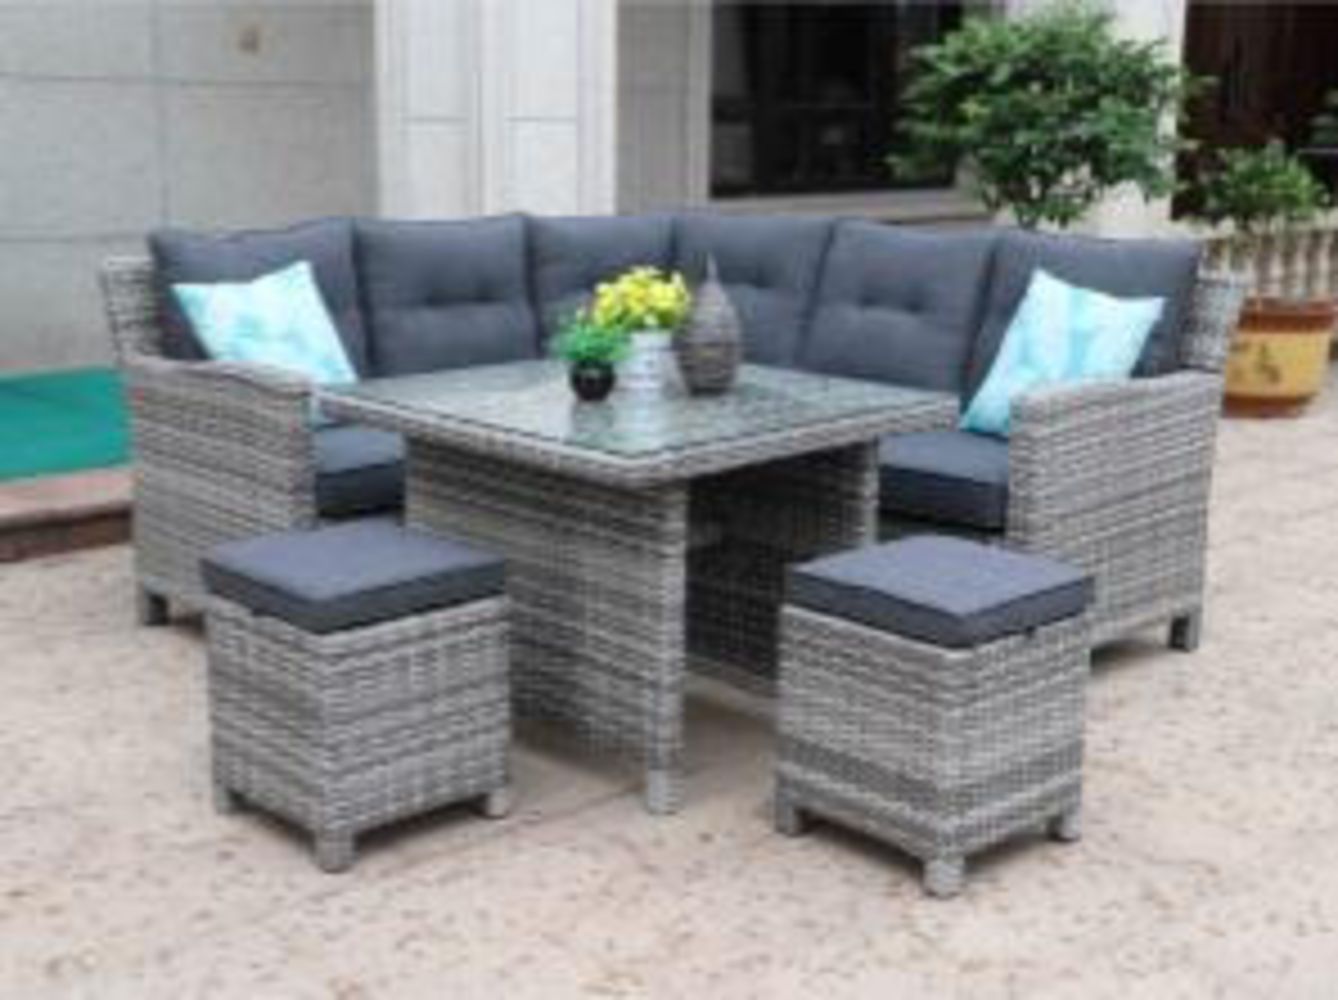 "The Chelsea Garden Company" Outdoor Rattan Furniture Clearance, Dining Sets, Tables, Sofas, Loungers, Bars etc